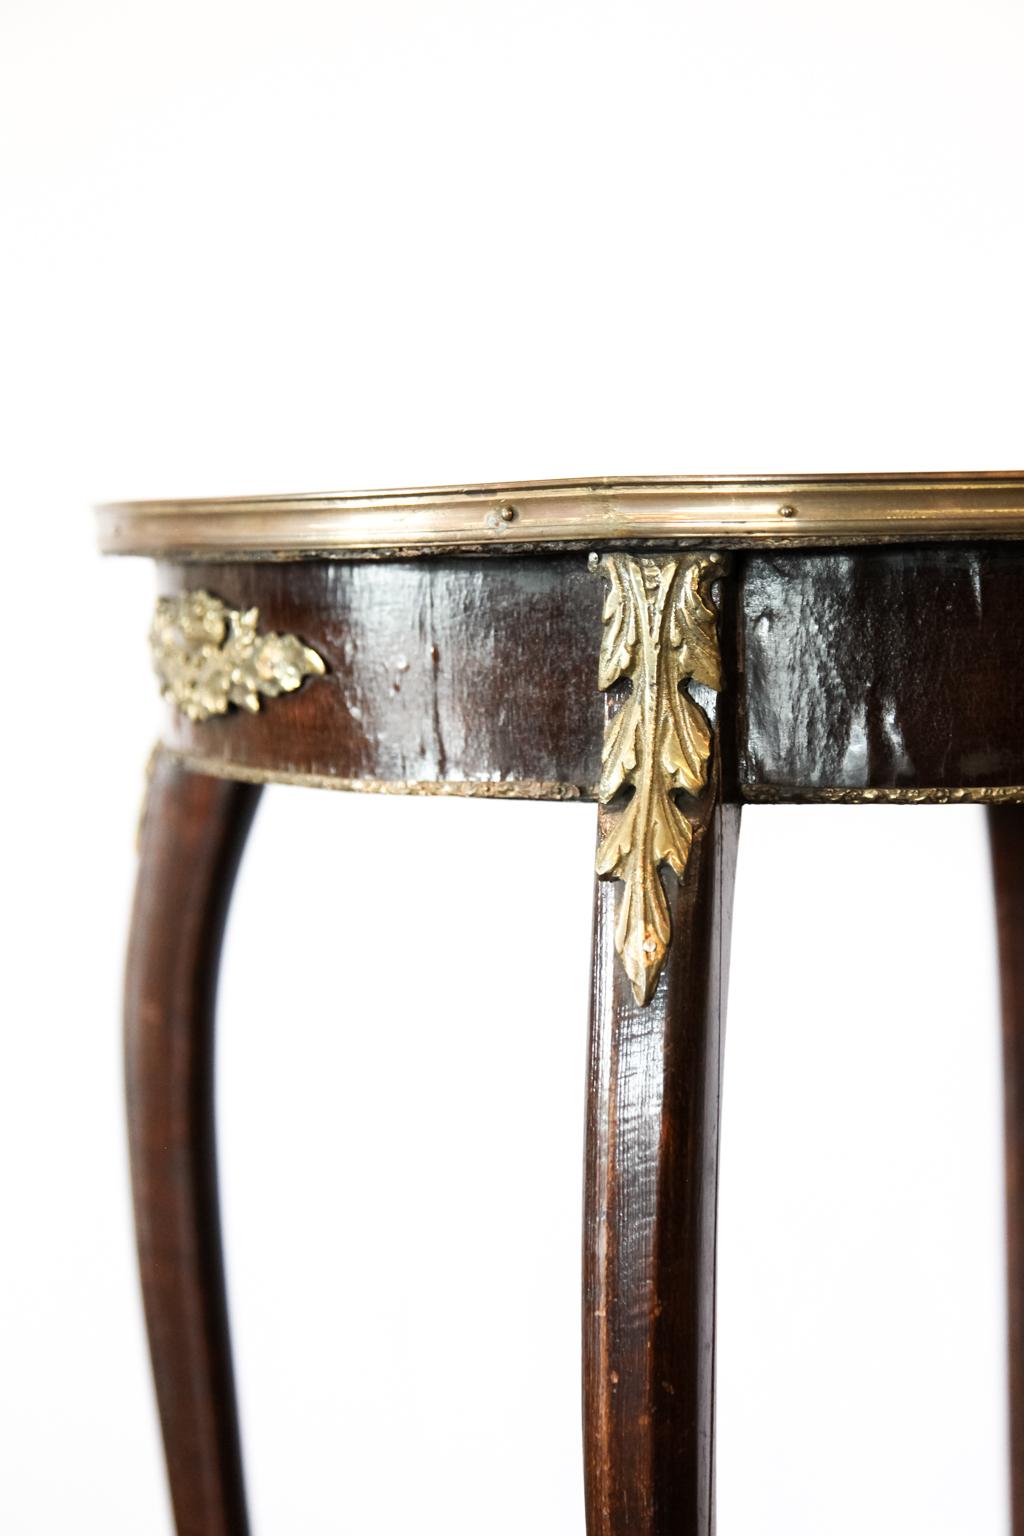 French inlaid marquetry shelf table, the cross banded top with inlaid flowers and foliate, surrounded with brass band; the apron, knees and feet with elaborate brass appliques, lower concave shaped shelf with inlaid stylized star.